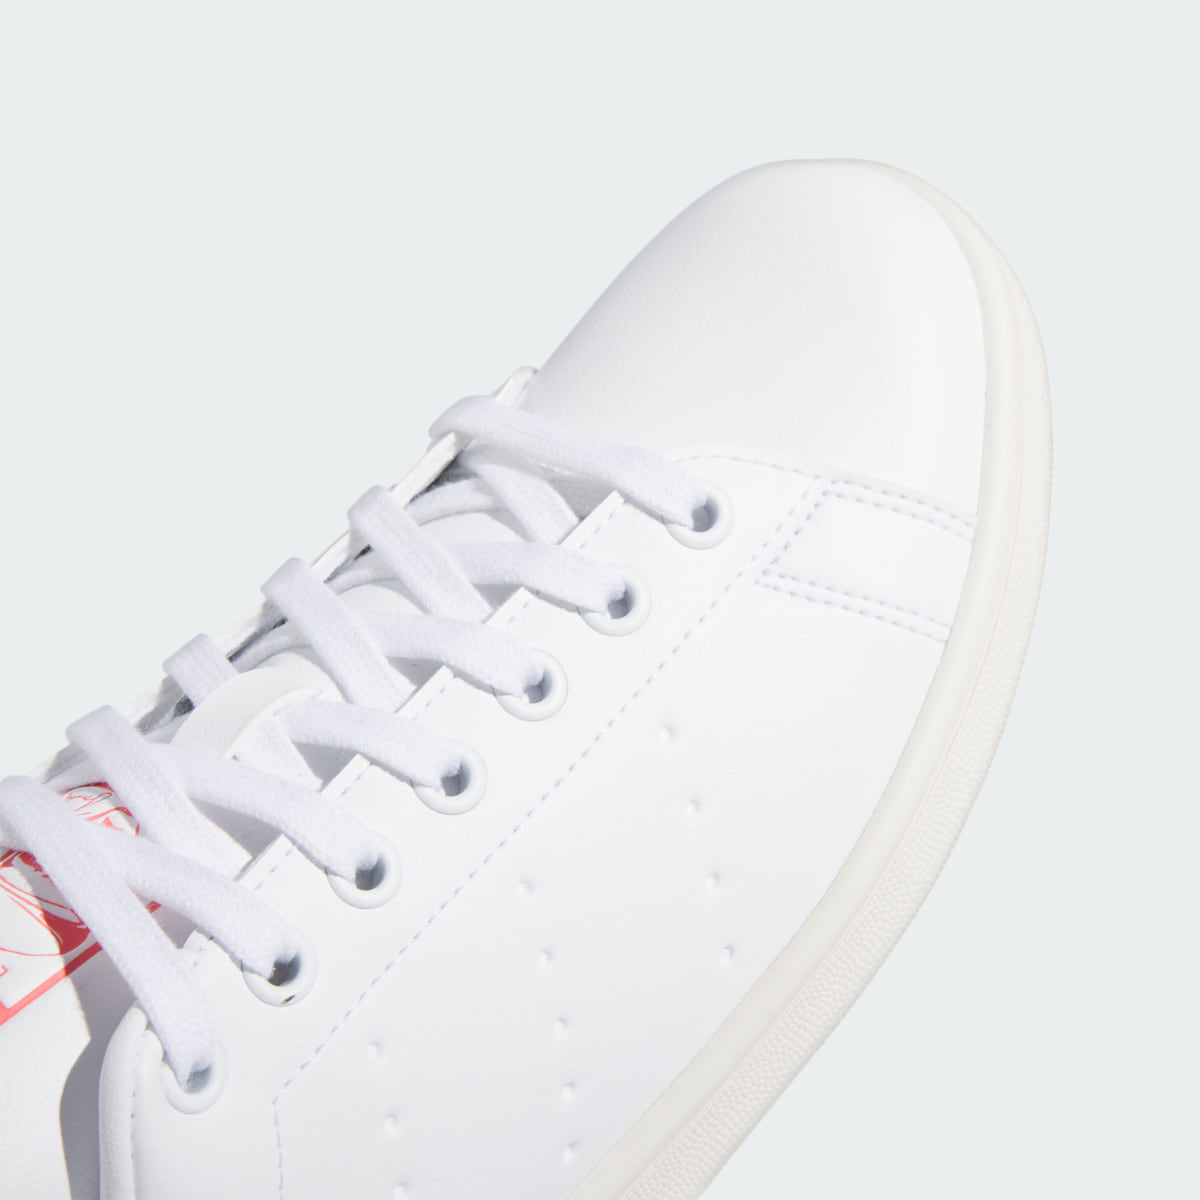 Adidas Stan Smith Golf Shoes. 9